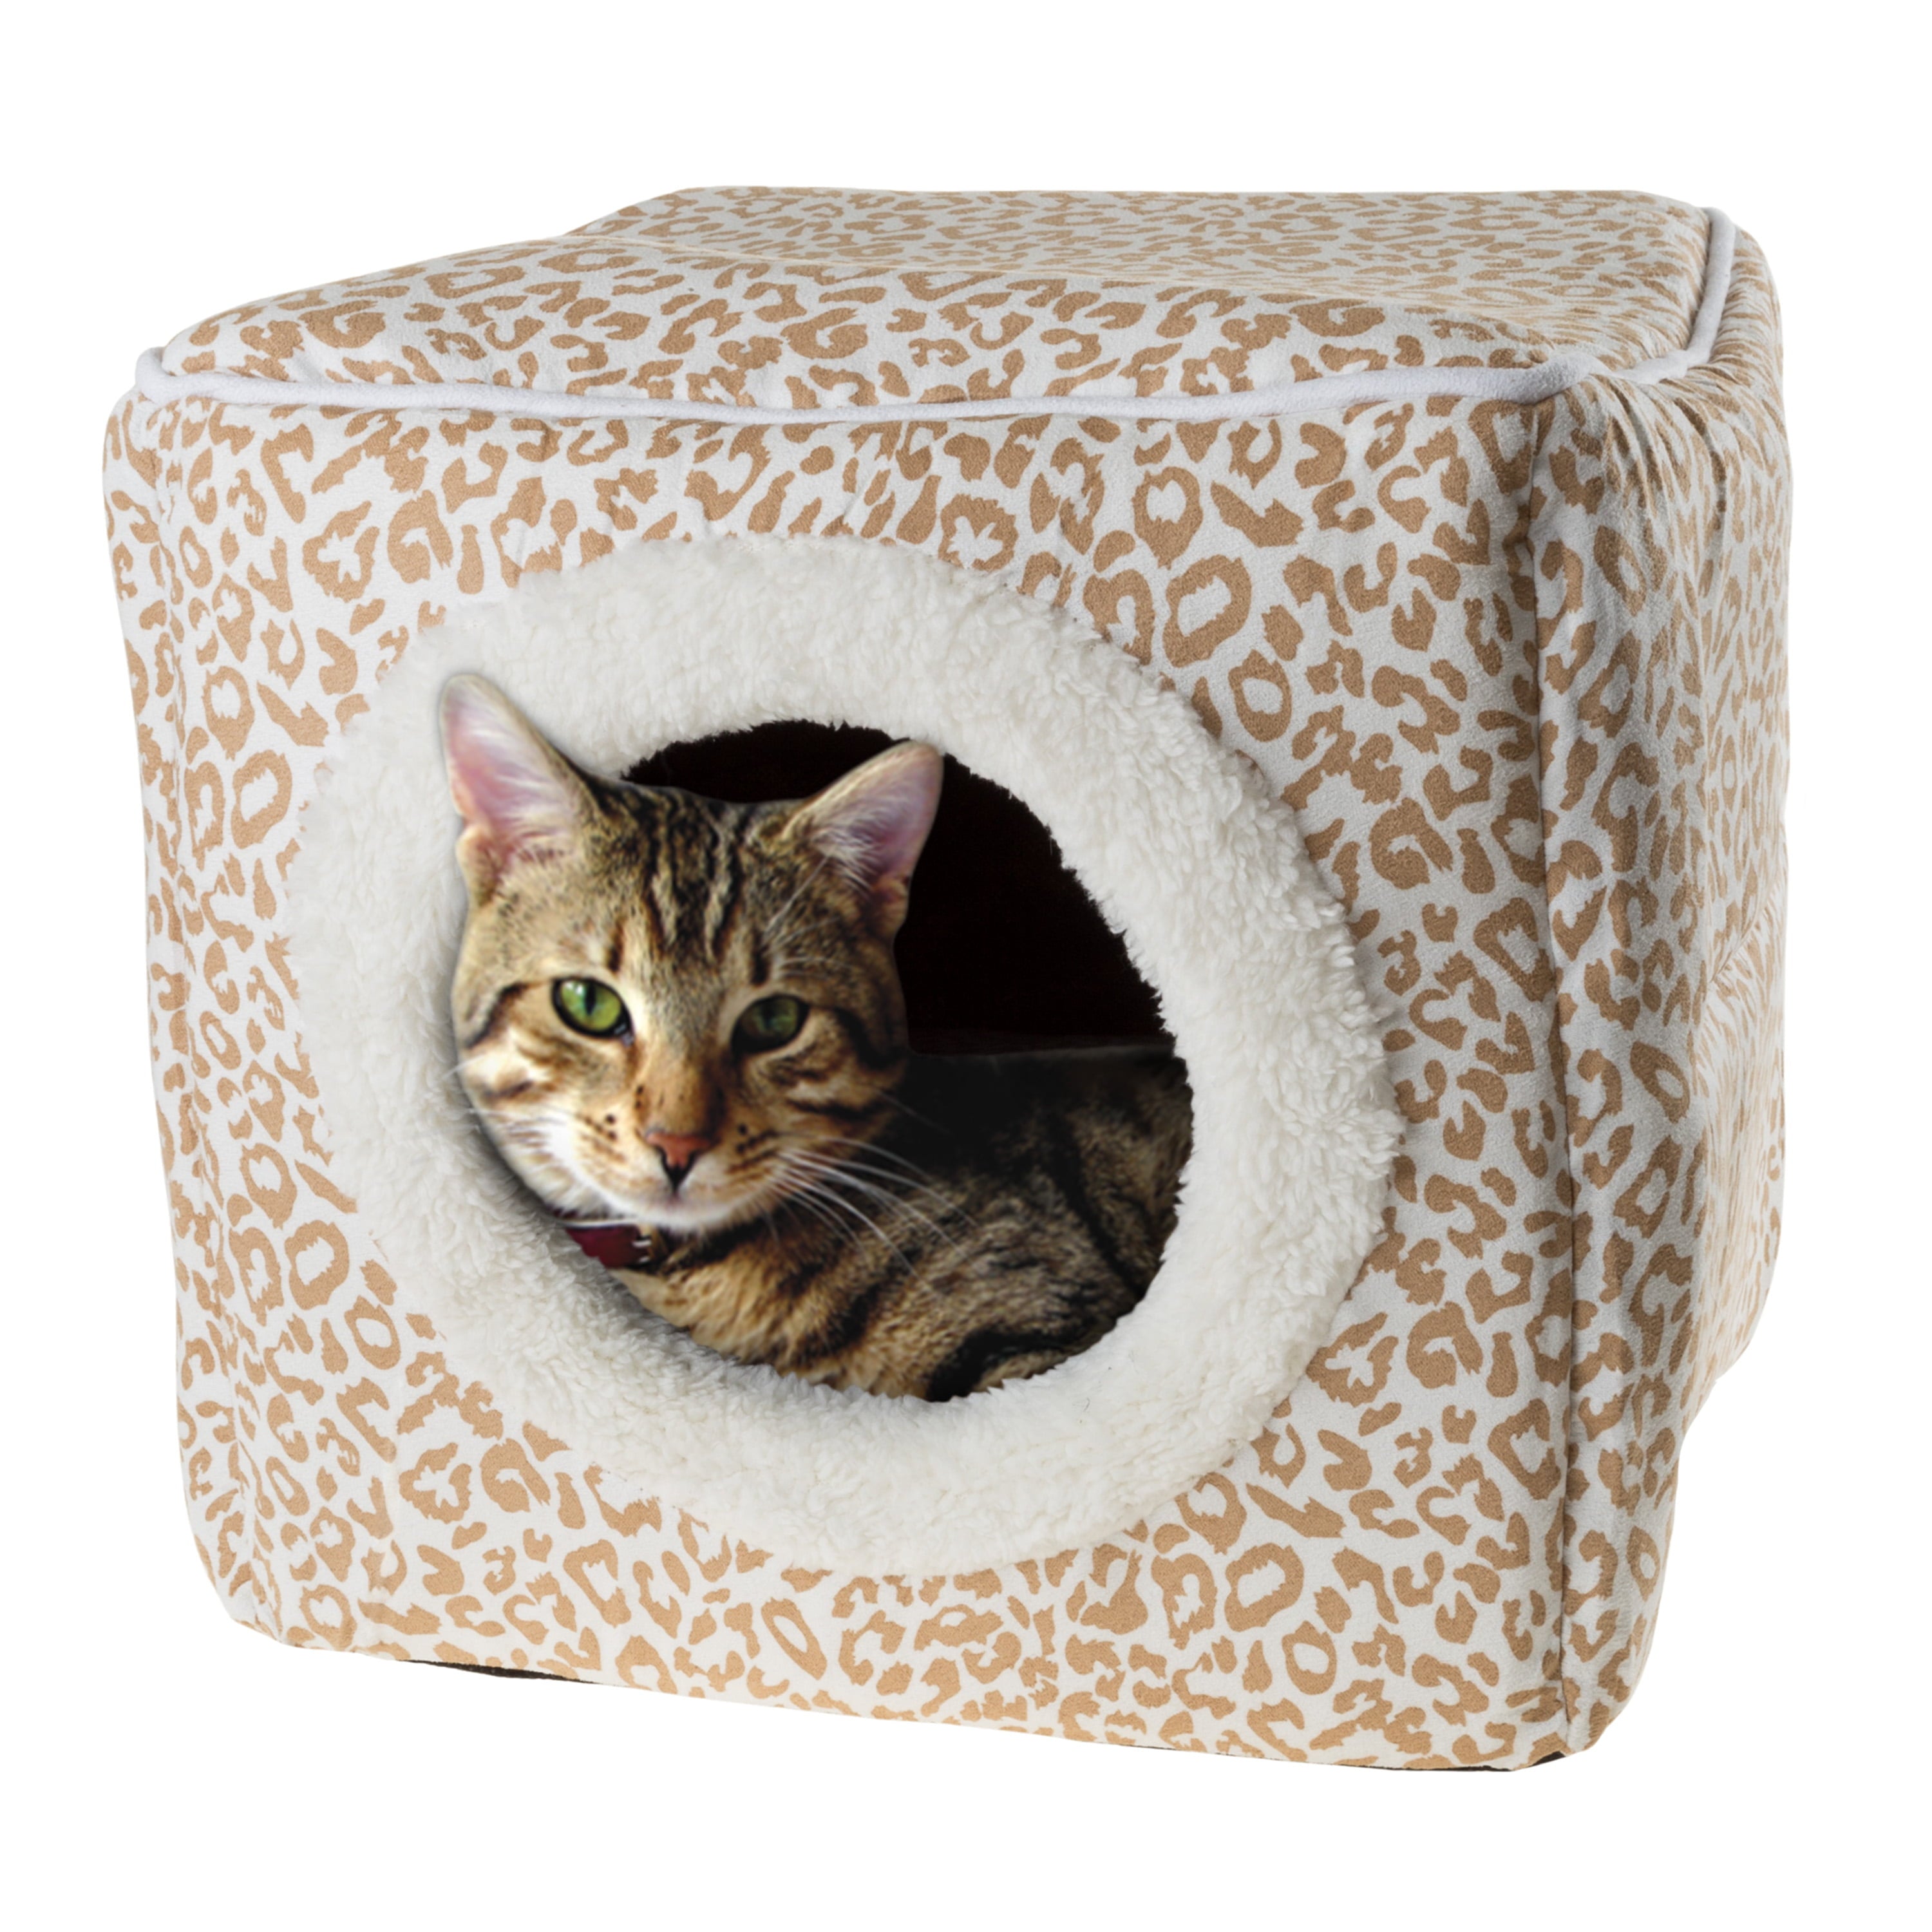 PETMAKER Cat Pet Bed Cave Indoor Enclosed Covered Cavern House for Cats Kittens and Small Pets with Removable Cushion， Tan White Animal Print